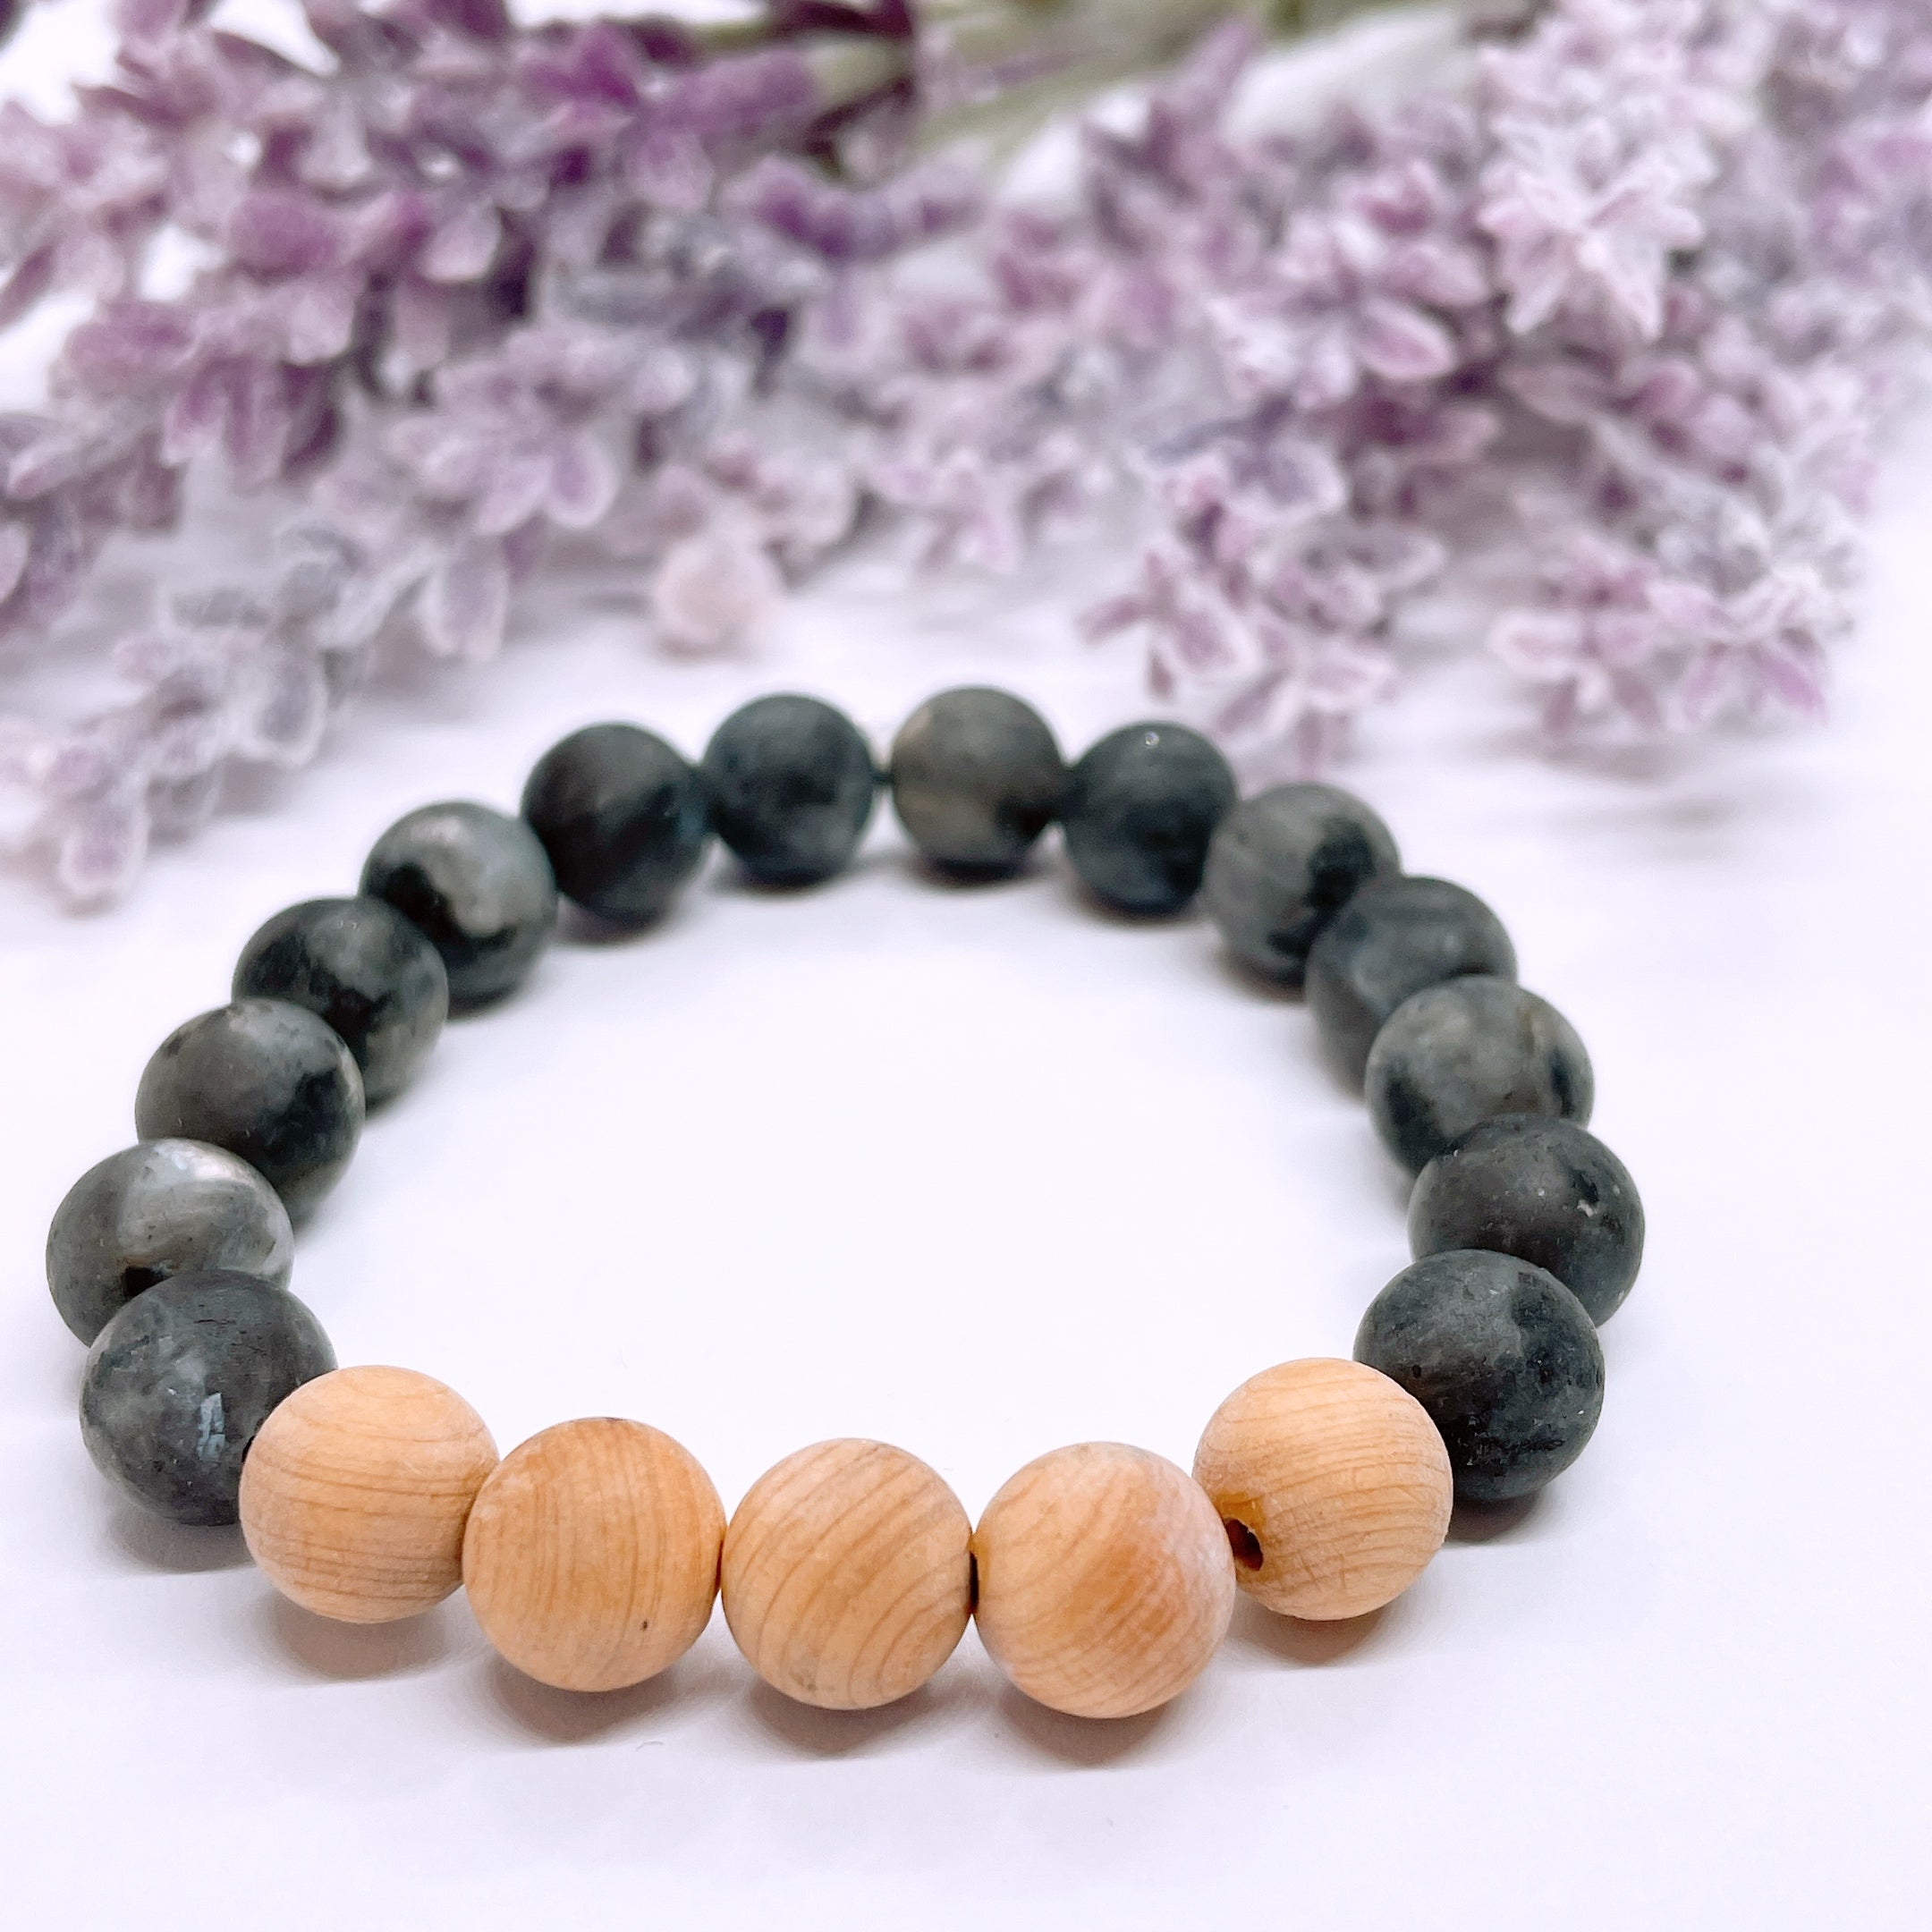 What's the Meaning of Beads? - Mindful Living Network 